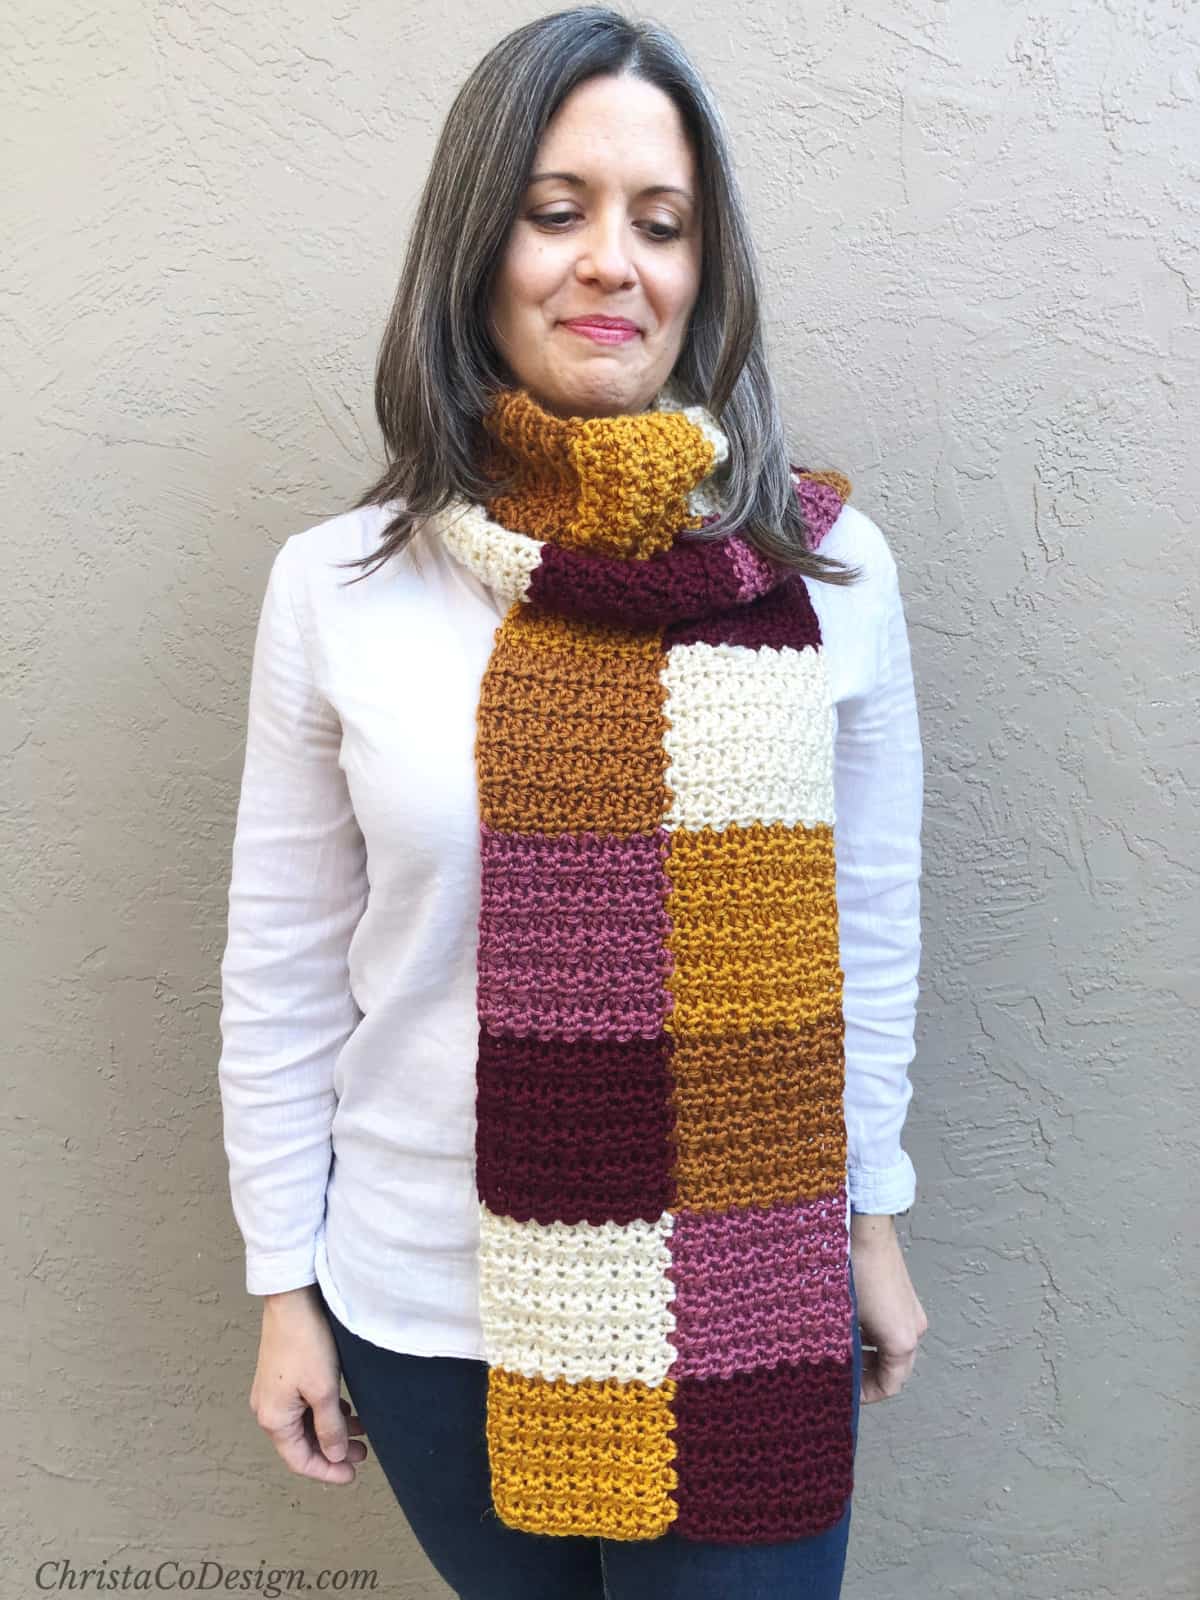 Autumn colored crochet scarf wrapped once around woman's neck.